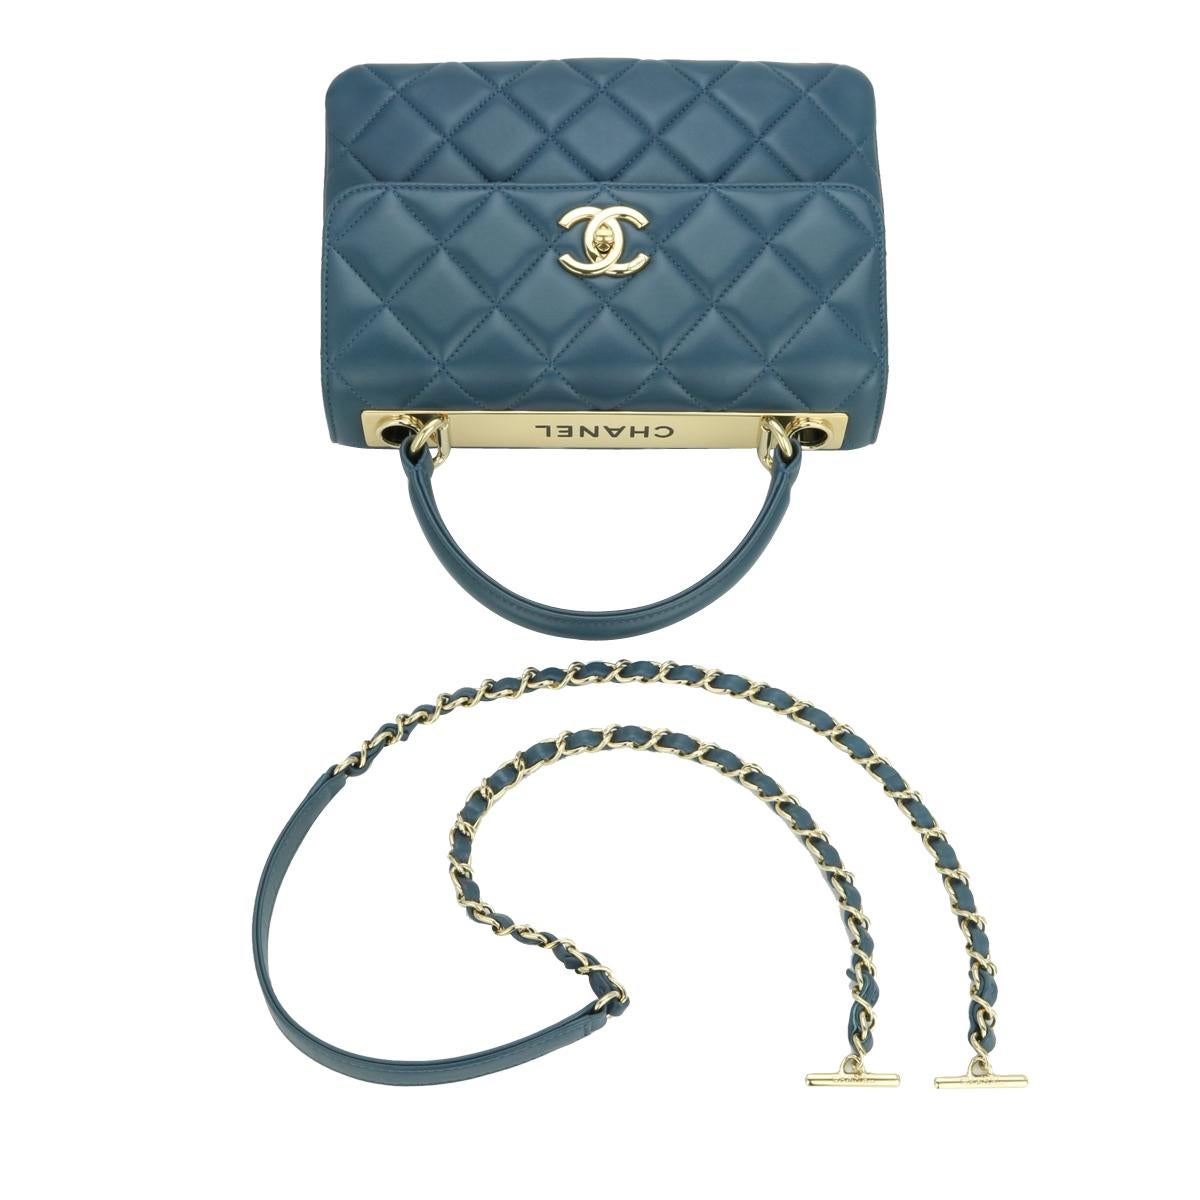 CHANEL Trendy CC Bag Small Blue Lambskin Light Gold Hardware 2017 For Sale 6